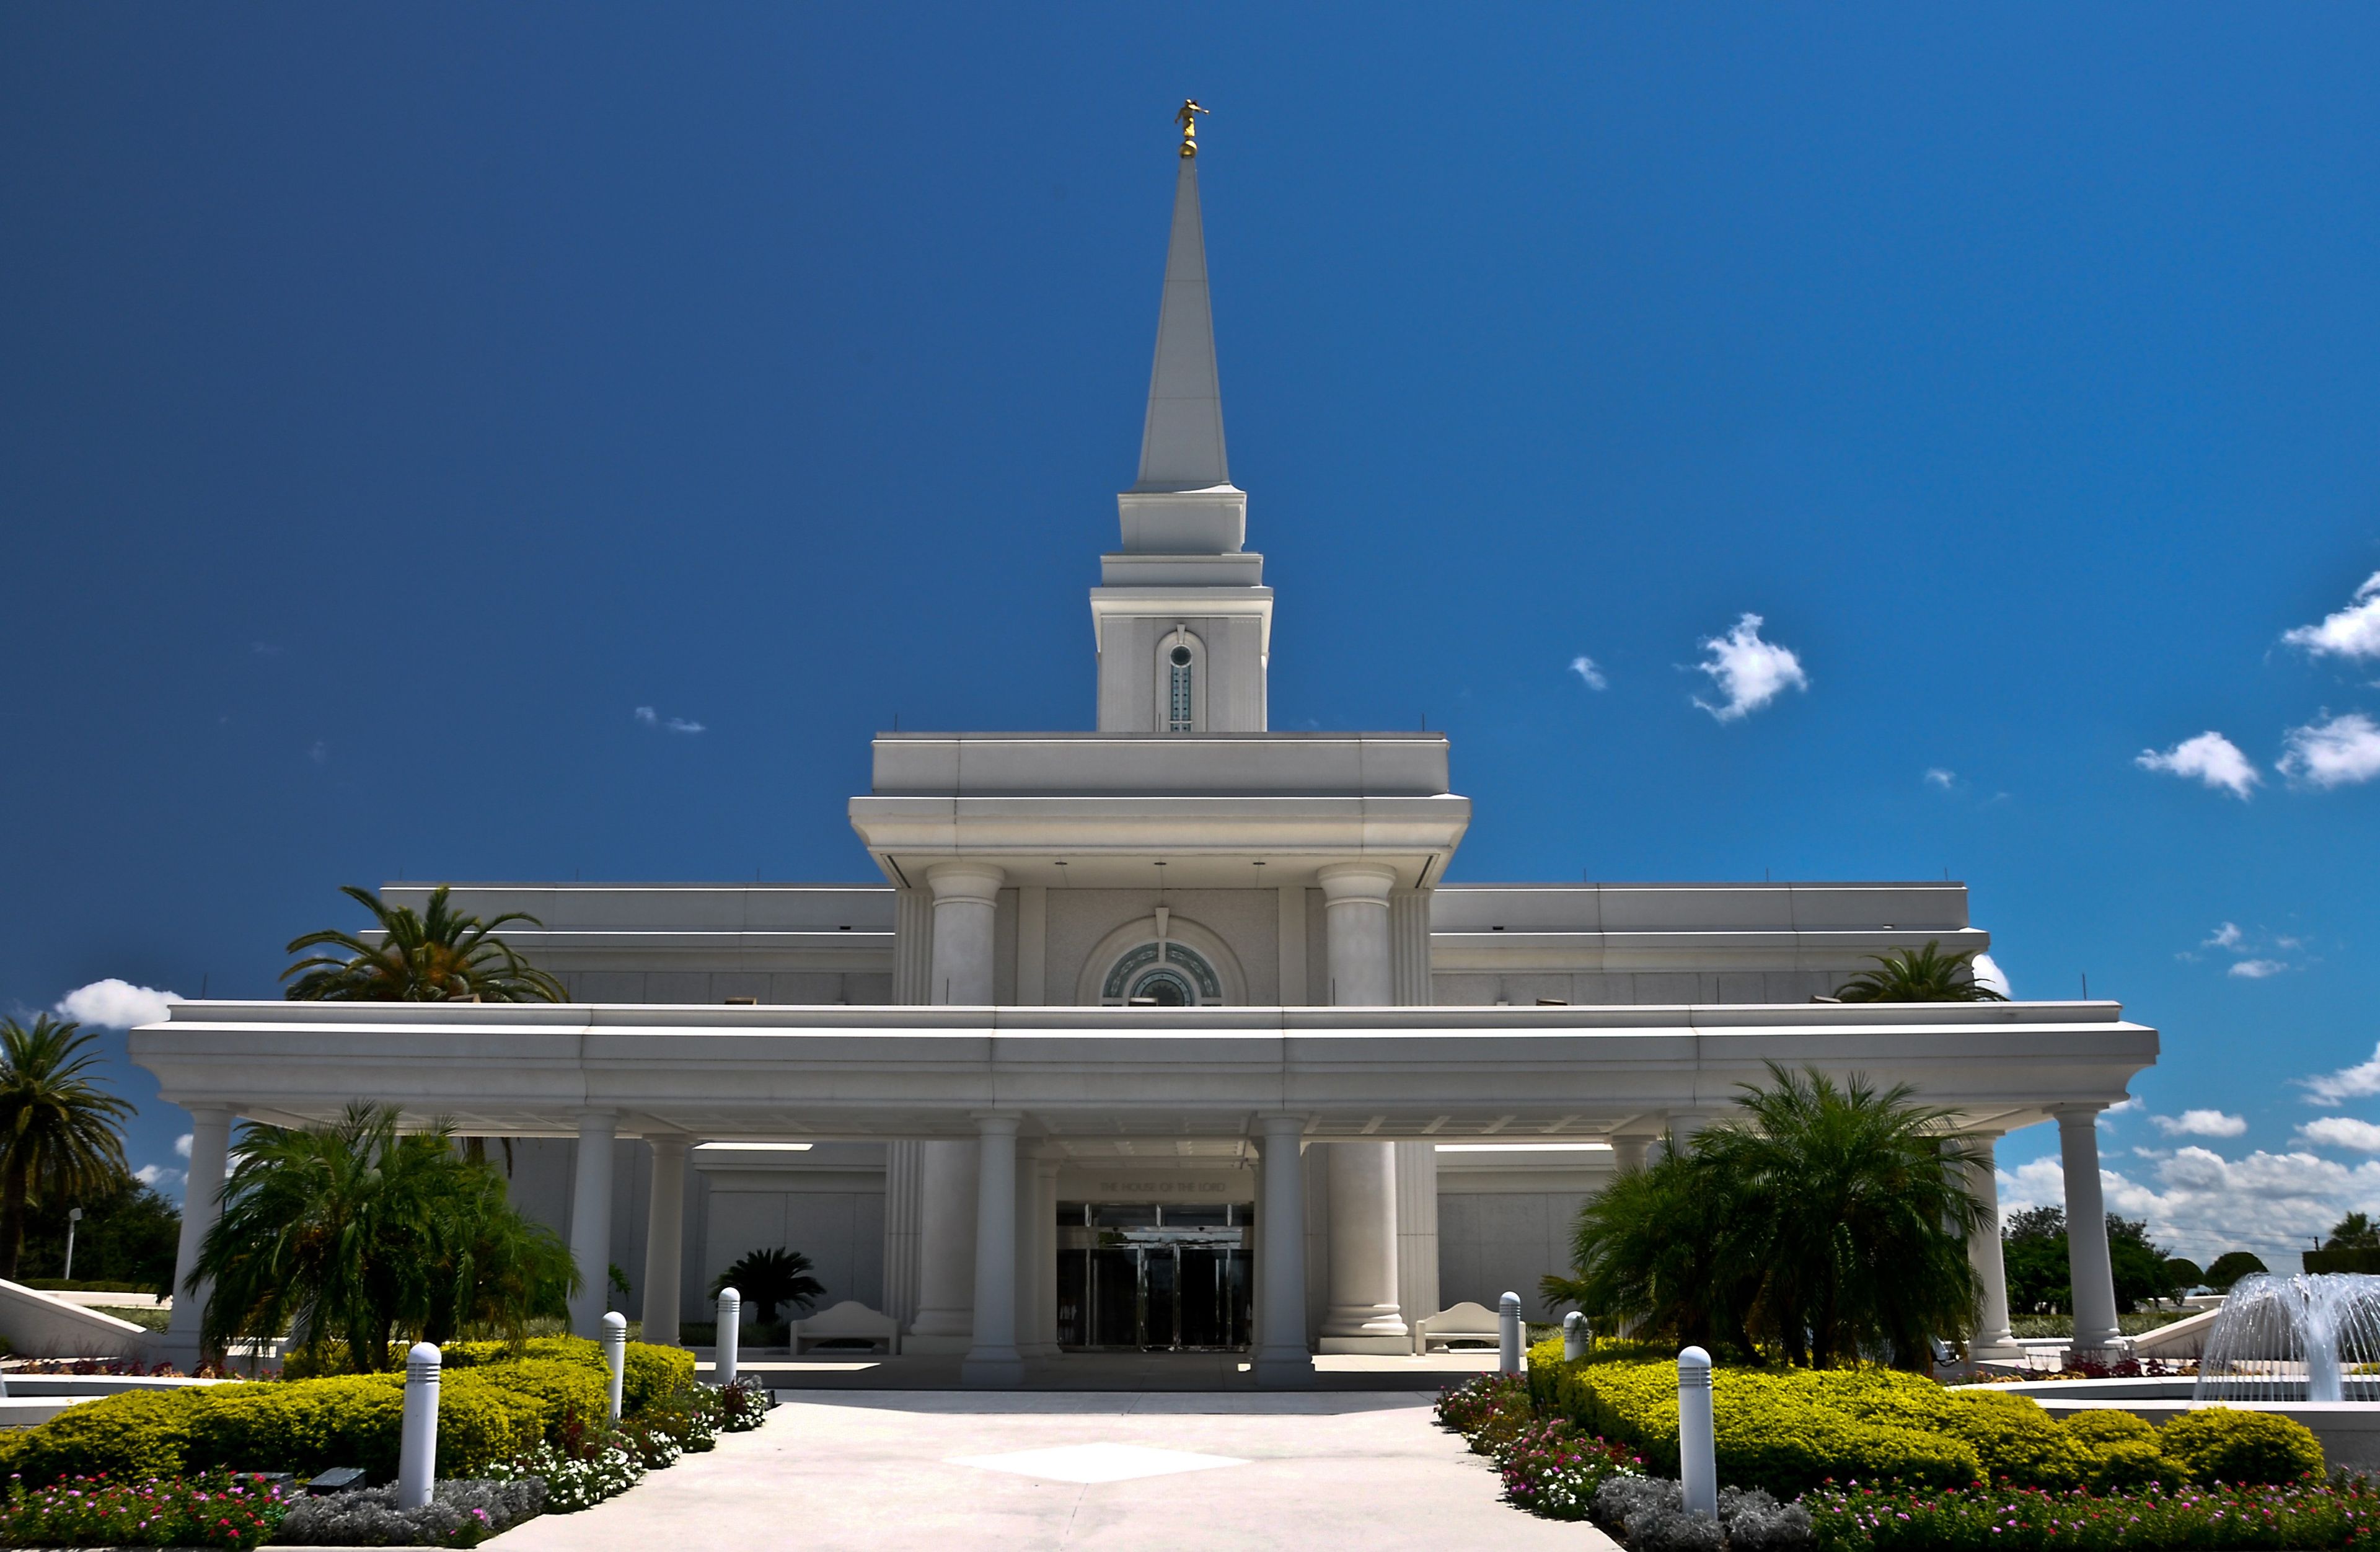 The Orlando Florida Temple entrance, including scenery and the exterior of the temple.